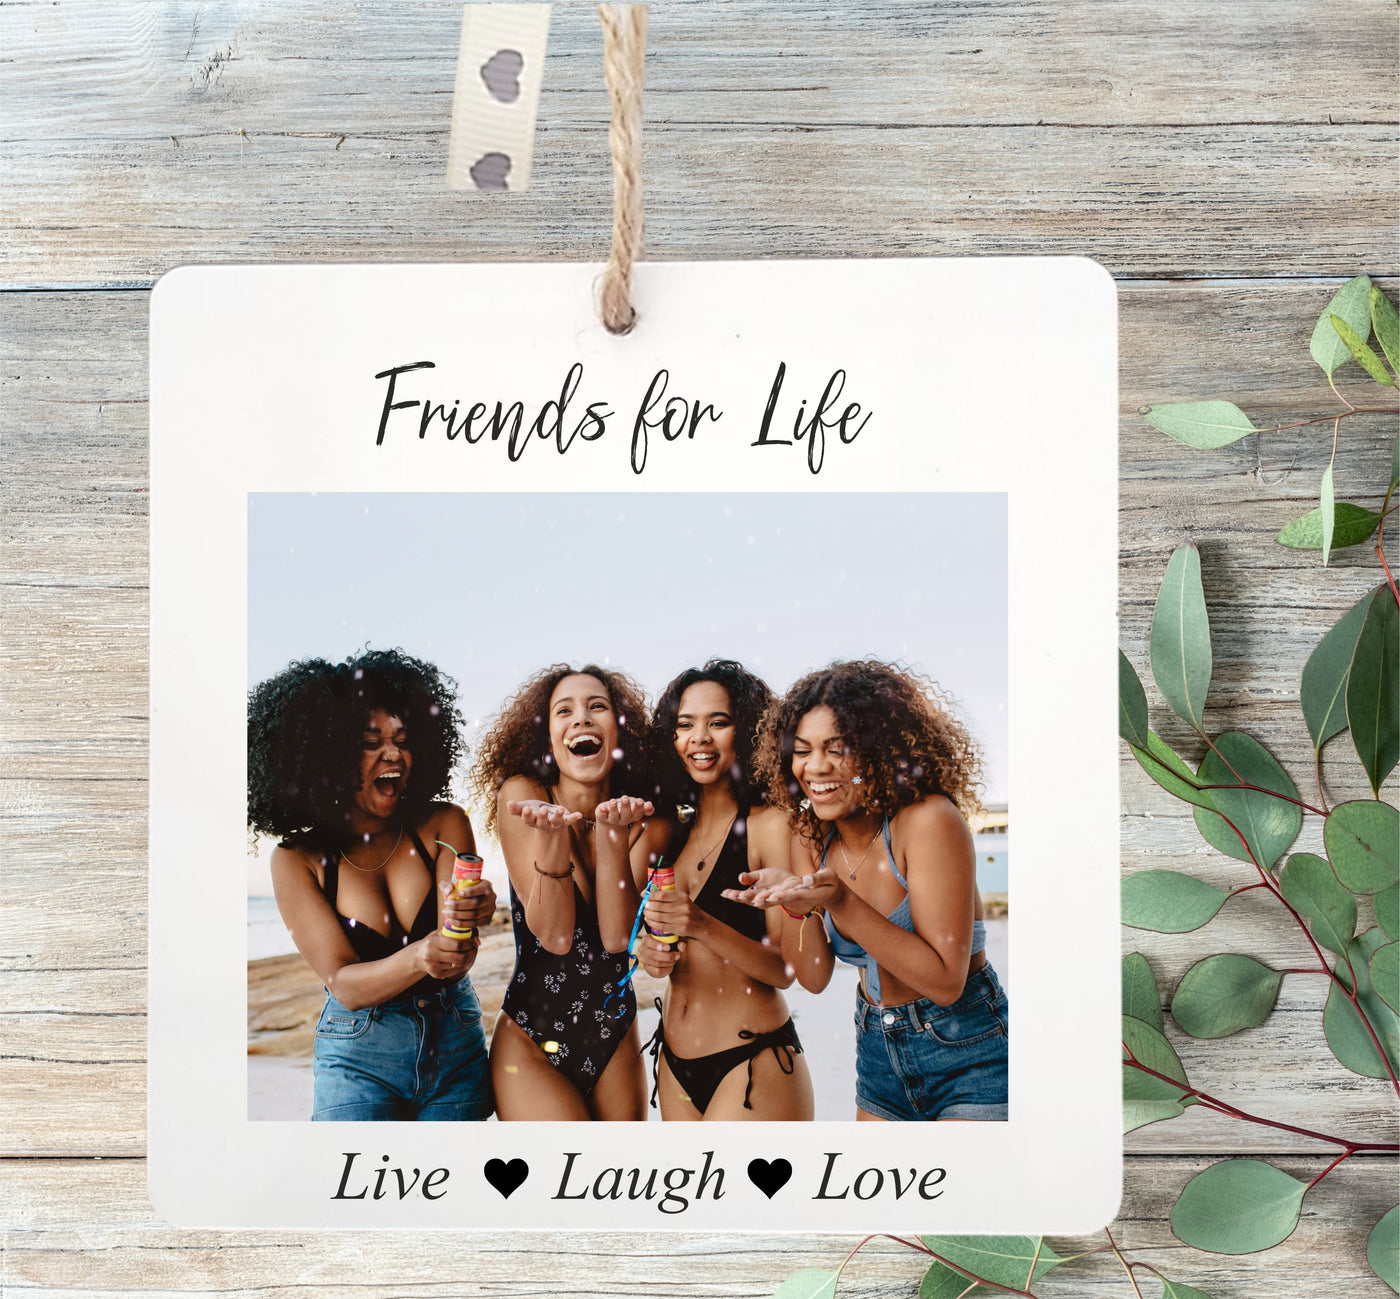 Unique Friendship Gifts to Touch Your BFF's Heart